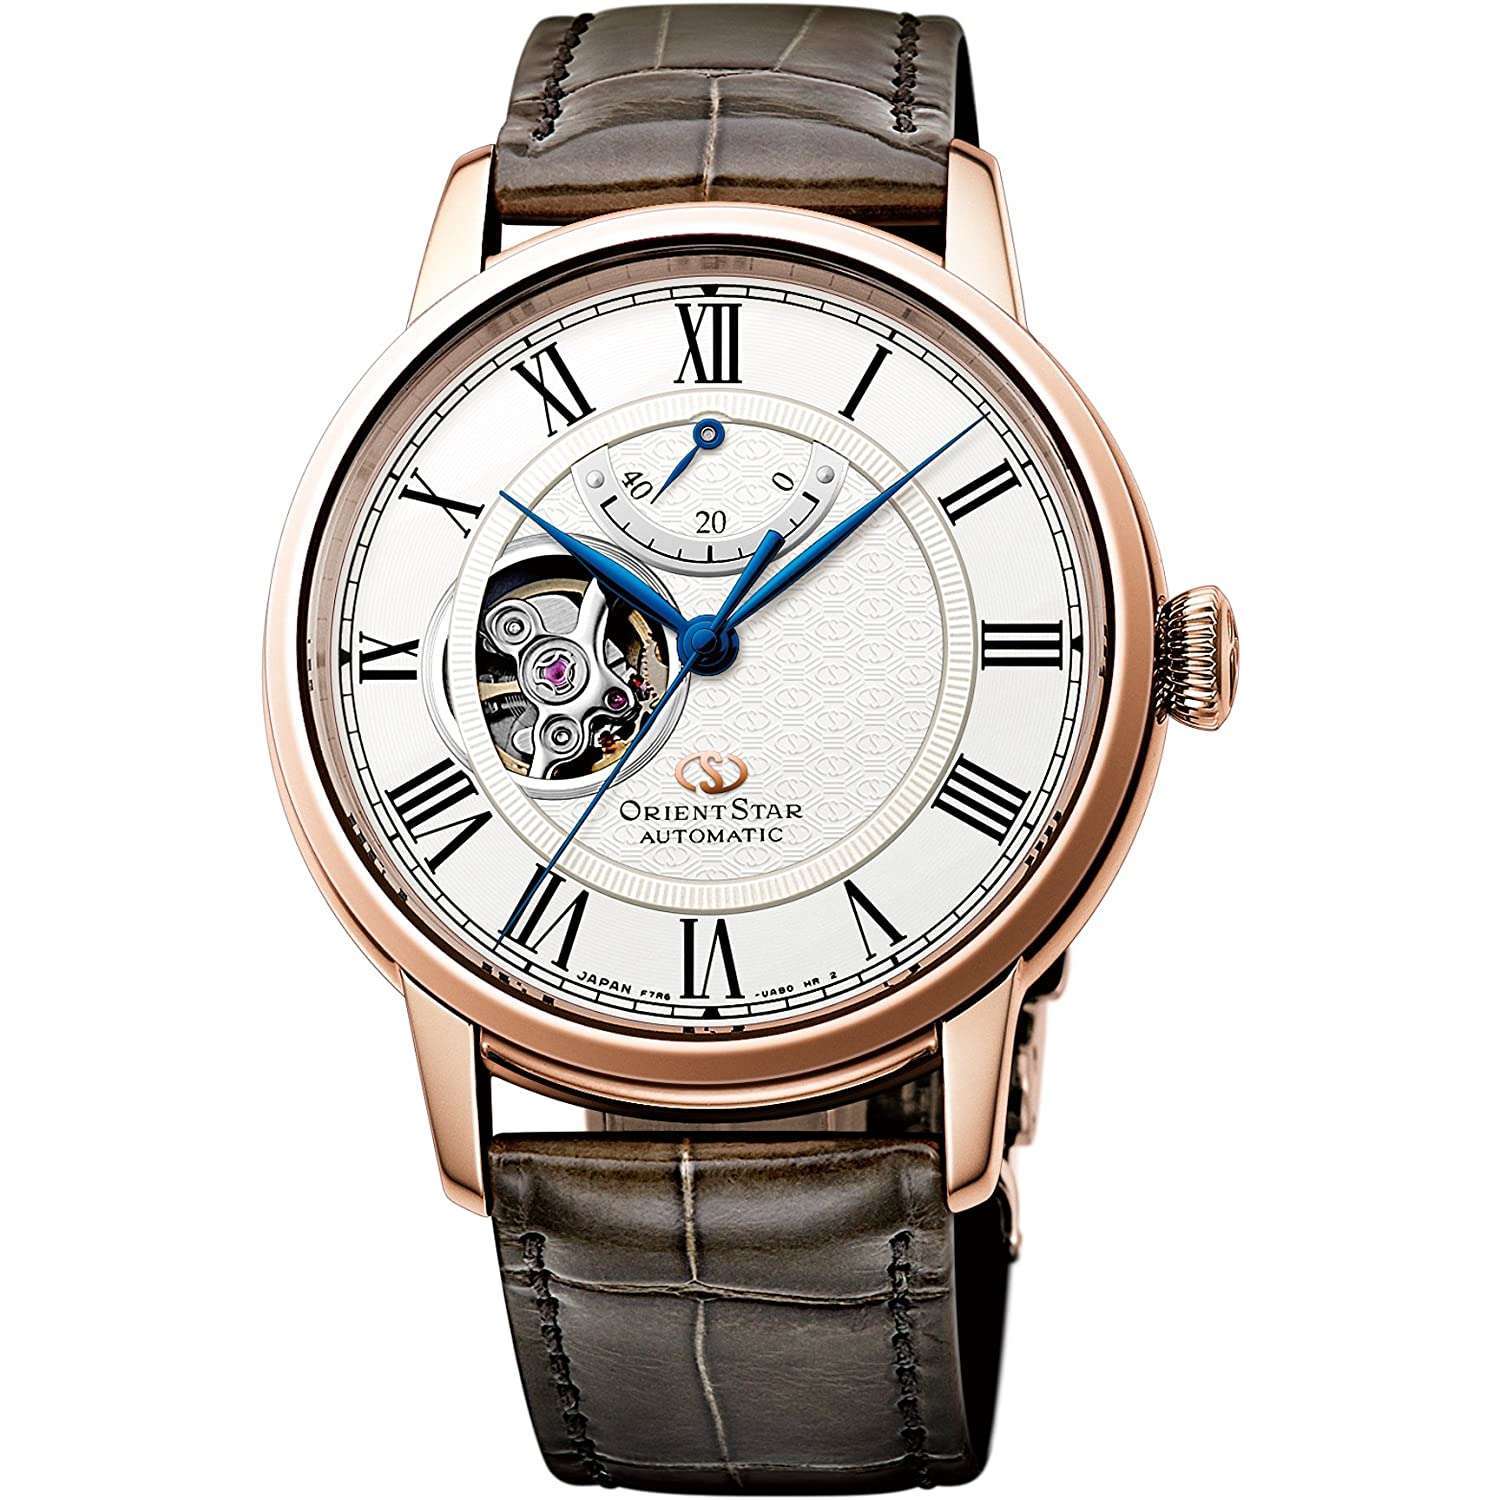 ORIENT STAR CLASSIC COLLECTION SEMI SKELETON (CLASSIC) MEN WATCH RK-HH0003S - ROOK JAPAN